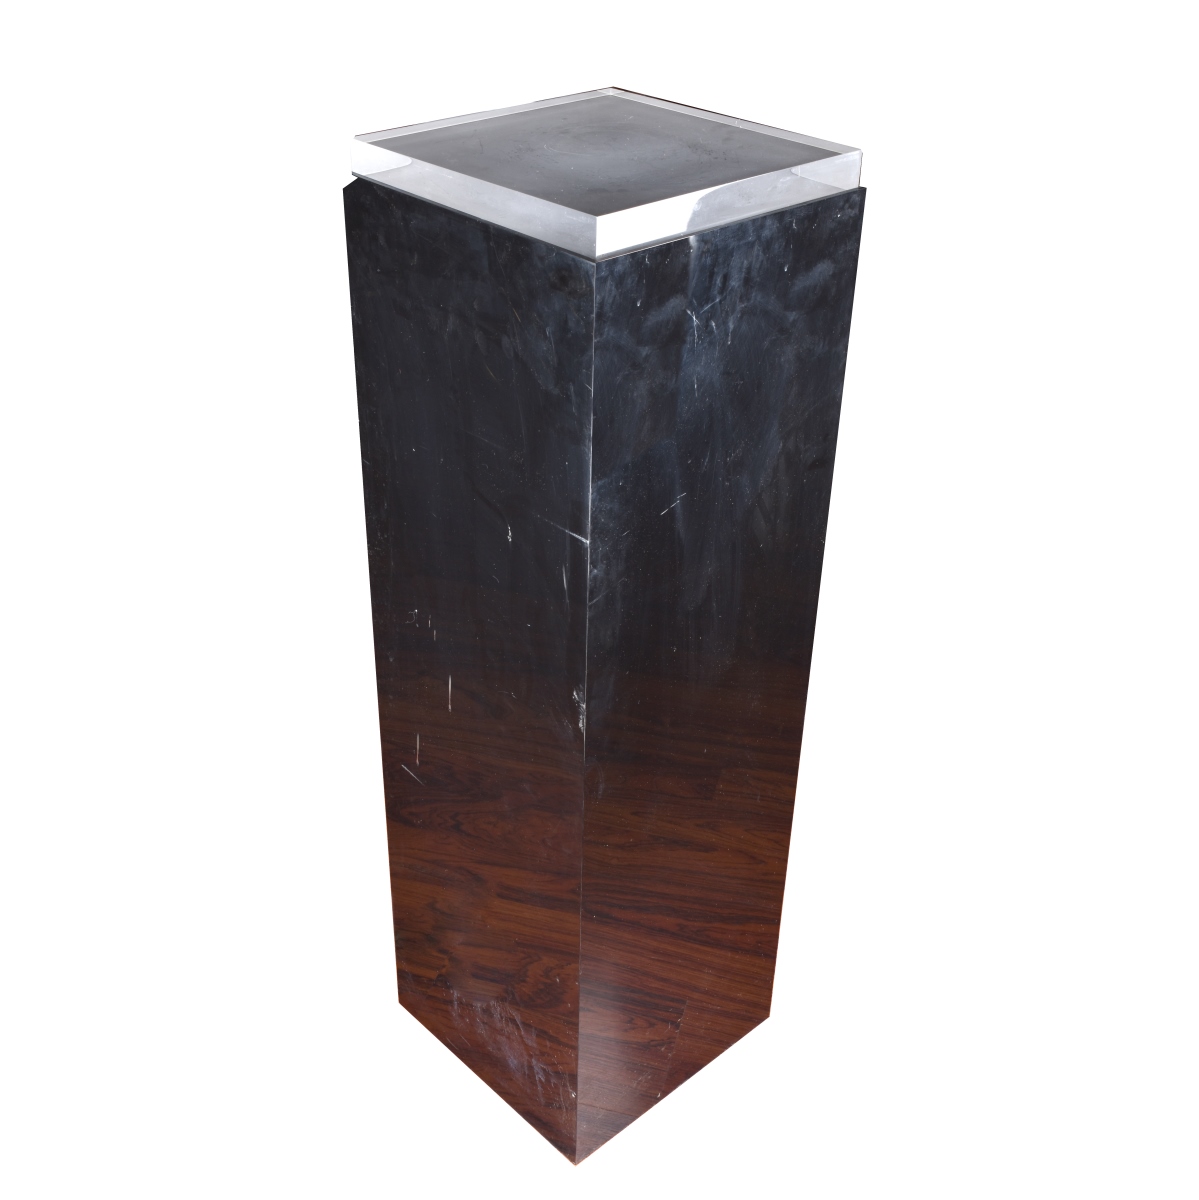 Acrylic Black Pedestal, Clear Top. Electric